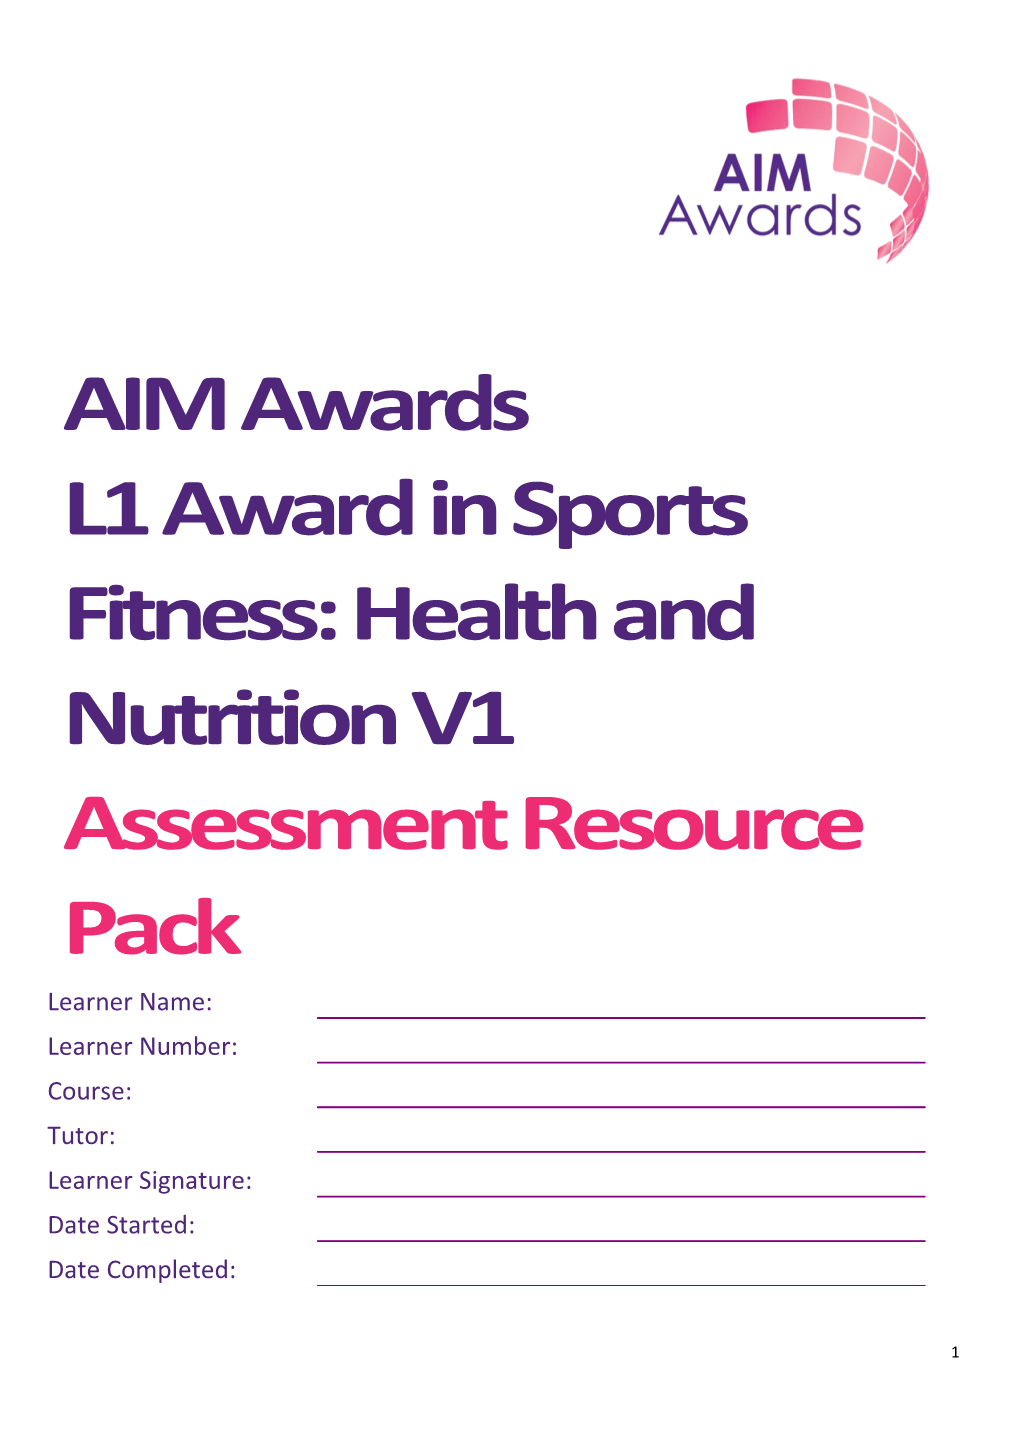 L1 Award in Sports Fitness: Health and Nutrition V1